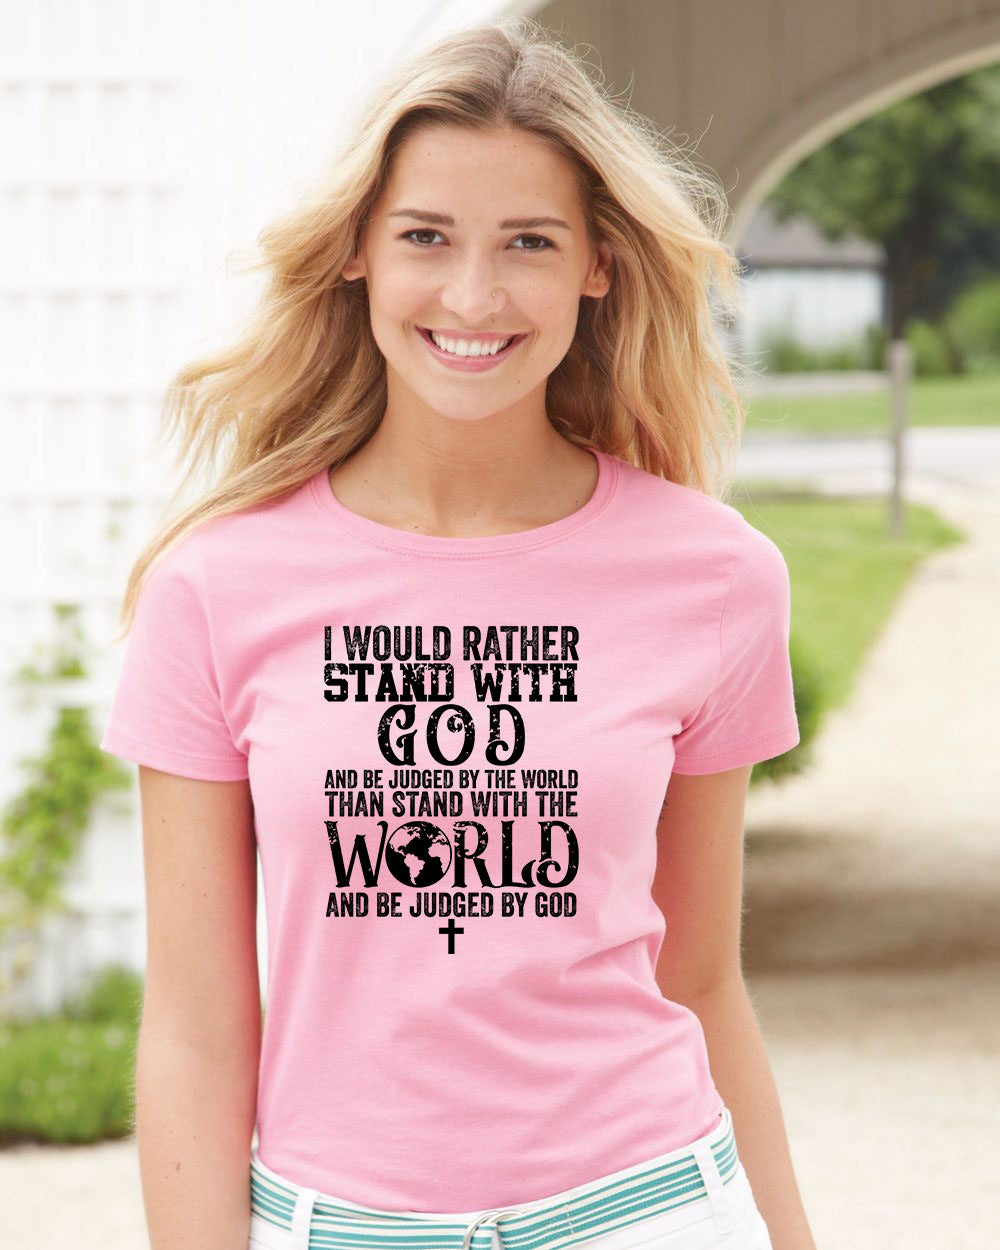 I Would Rather Stand With God And Be Judged By The World  Than Stand With the World  And Be Judged By God T Shirt